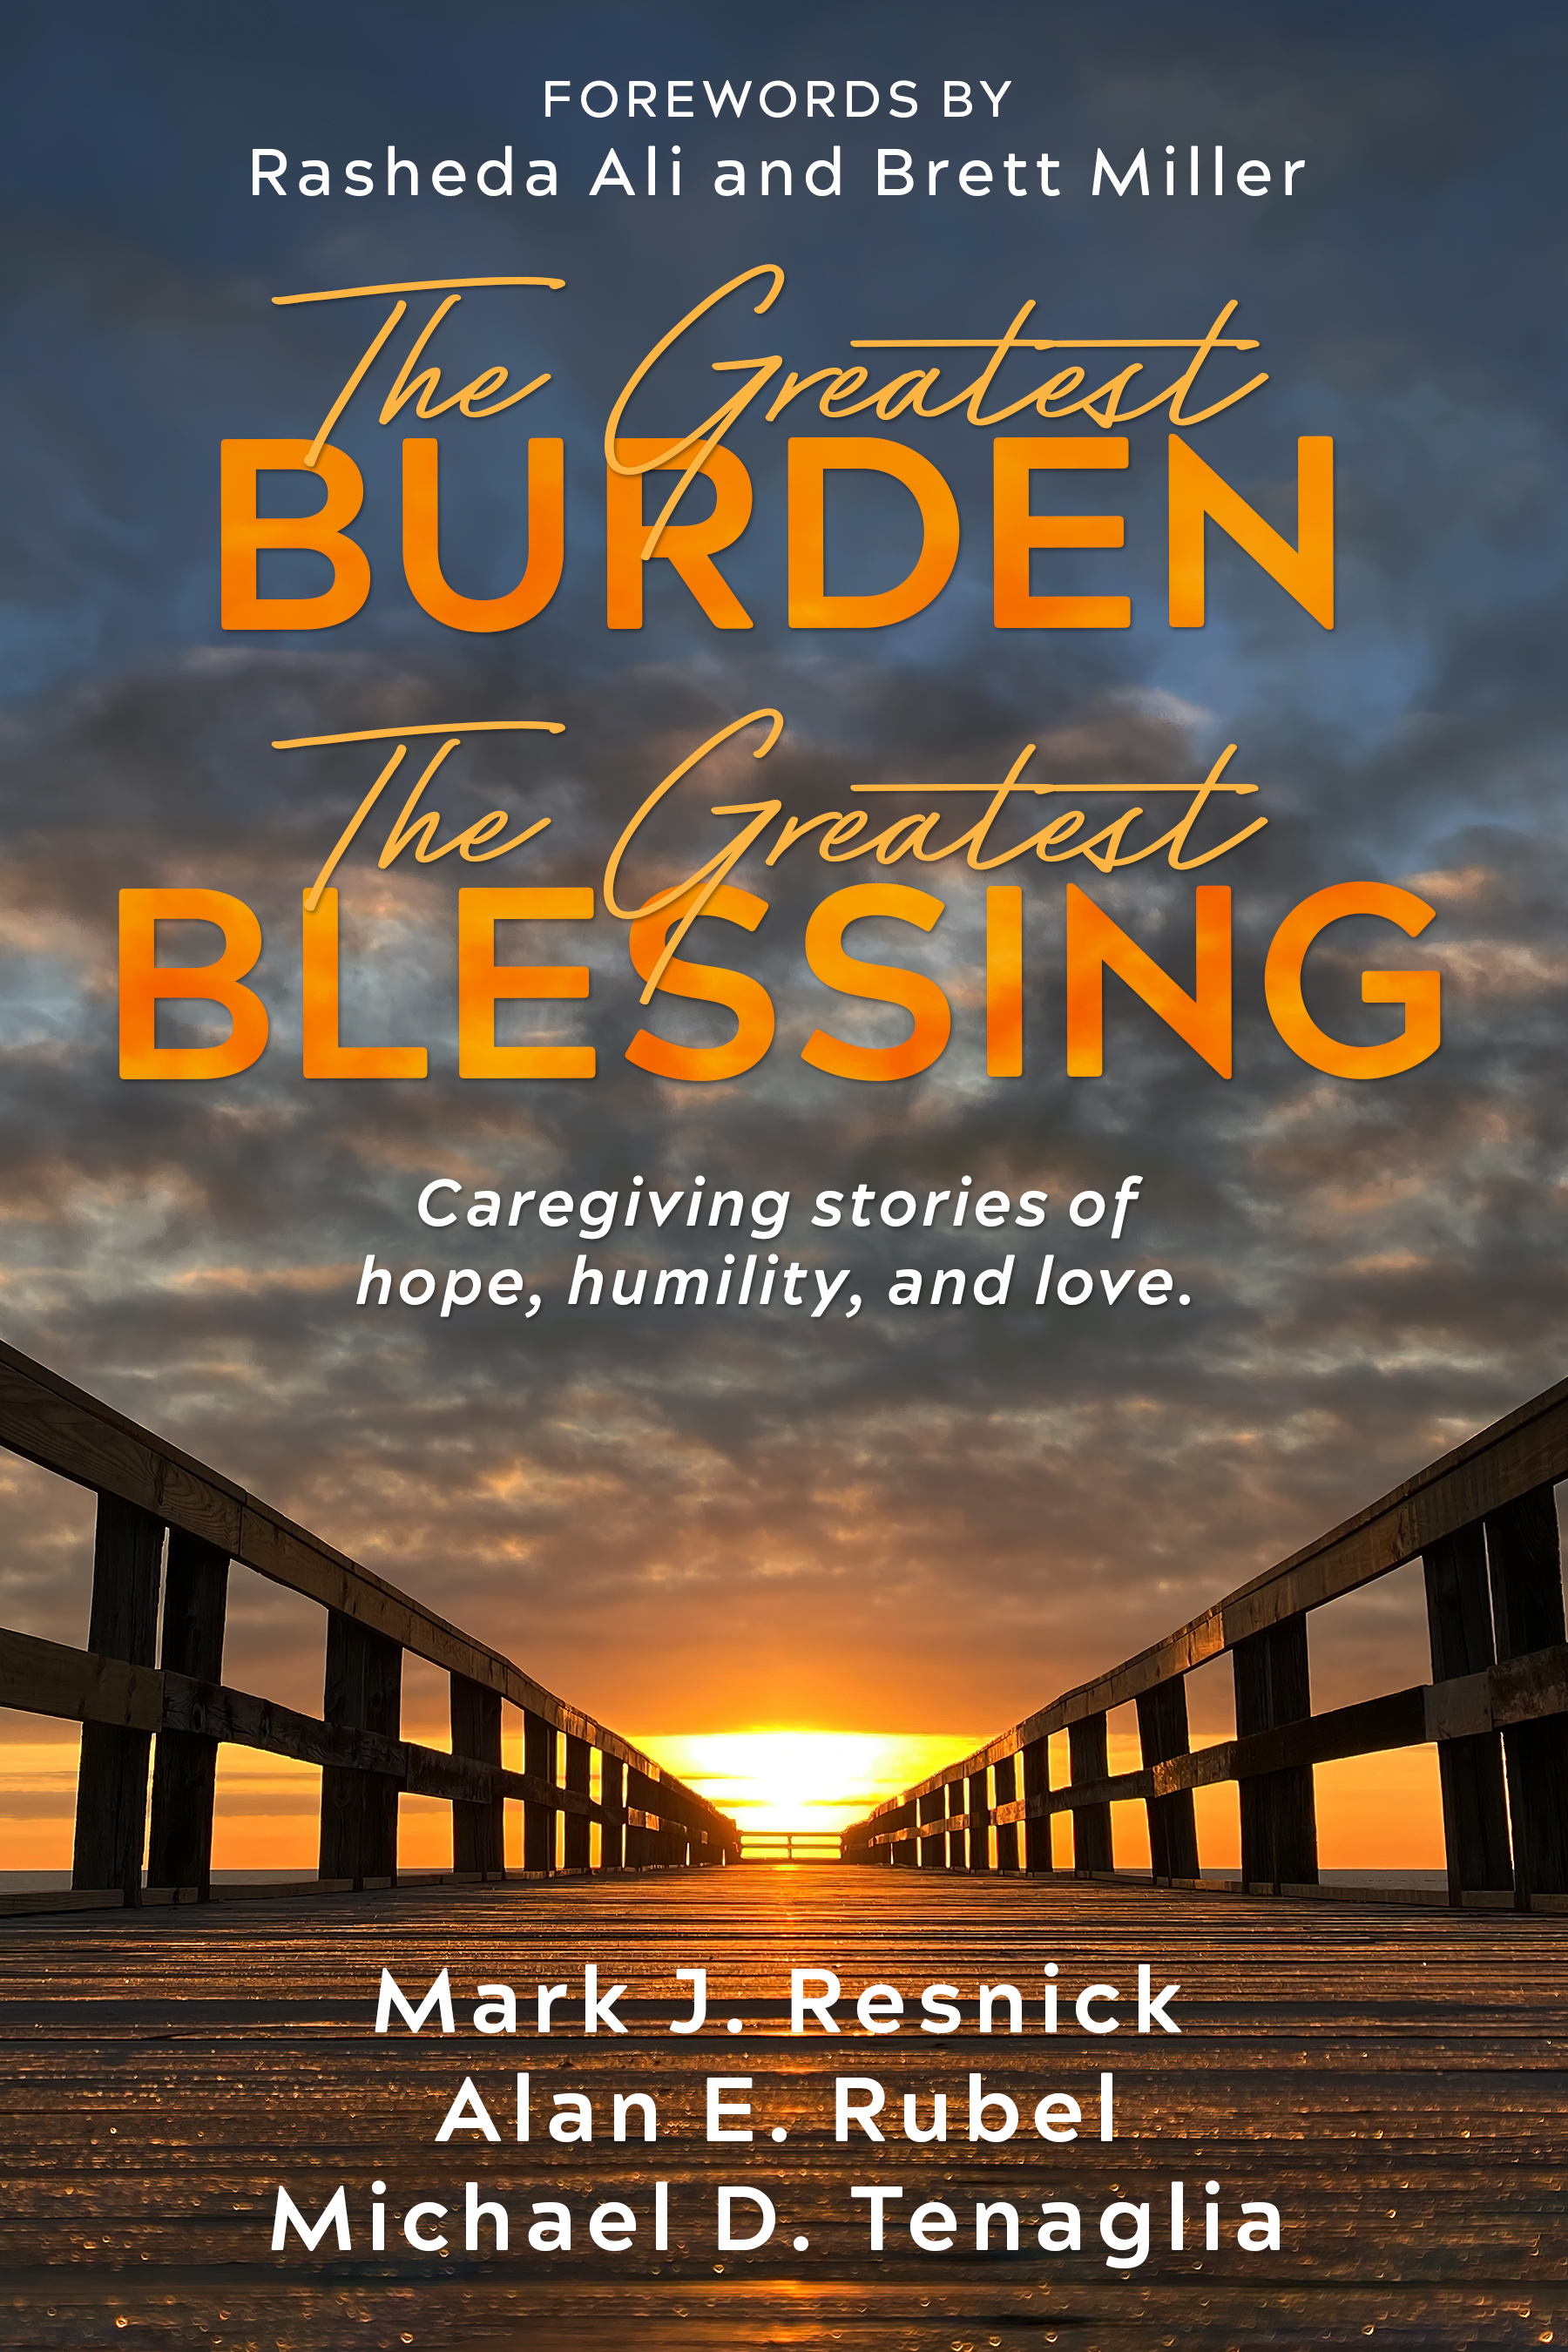 New Book "The Greatest Burden The Greatest Blessing: Caregiving Stories of Hope, Humility, and Love" Reveals Heartfelt Exploration into the World of Caregiving and Launches to Rave Reviews